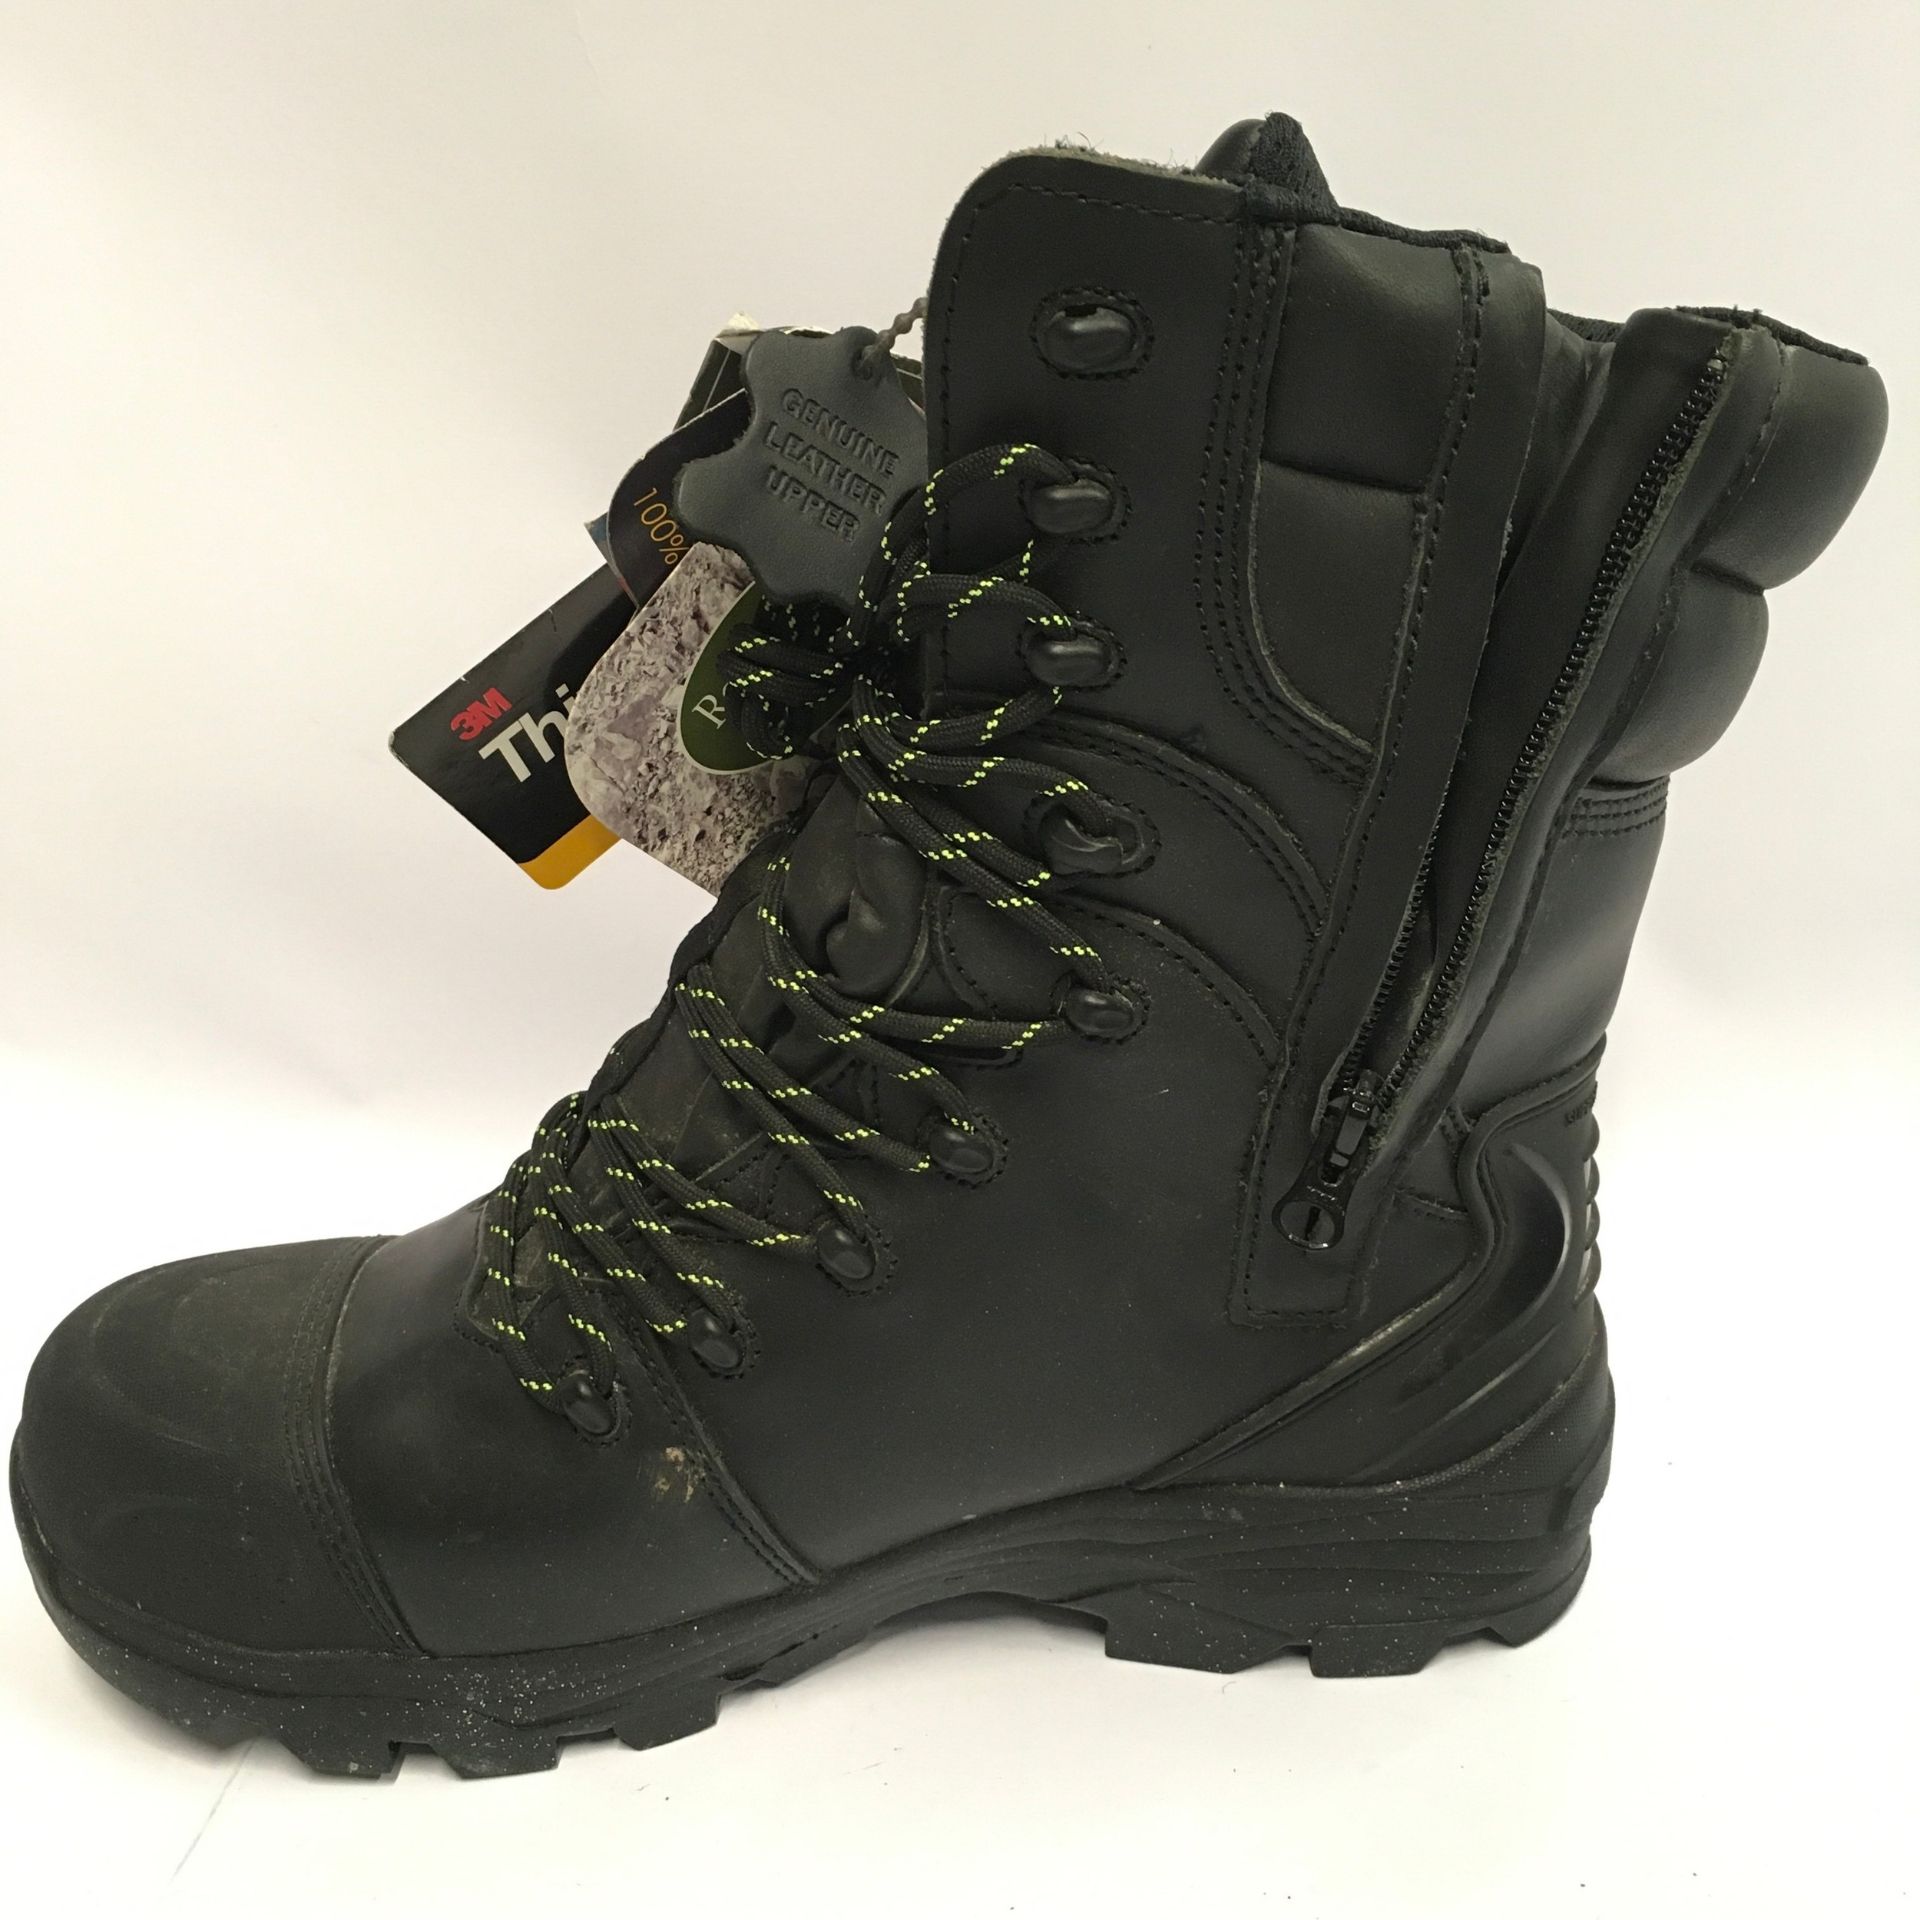 Pair of Rock Fall work boots. Size 9 (20. - Image 2 of 2